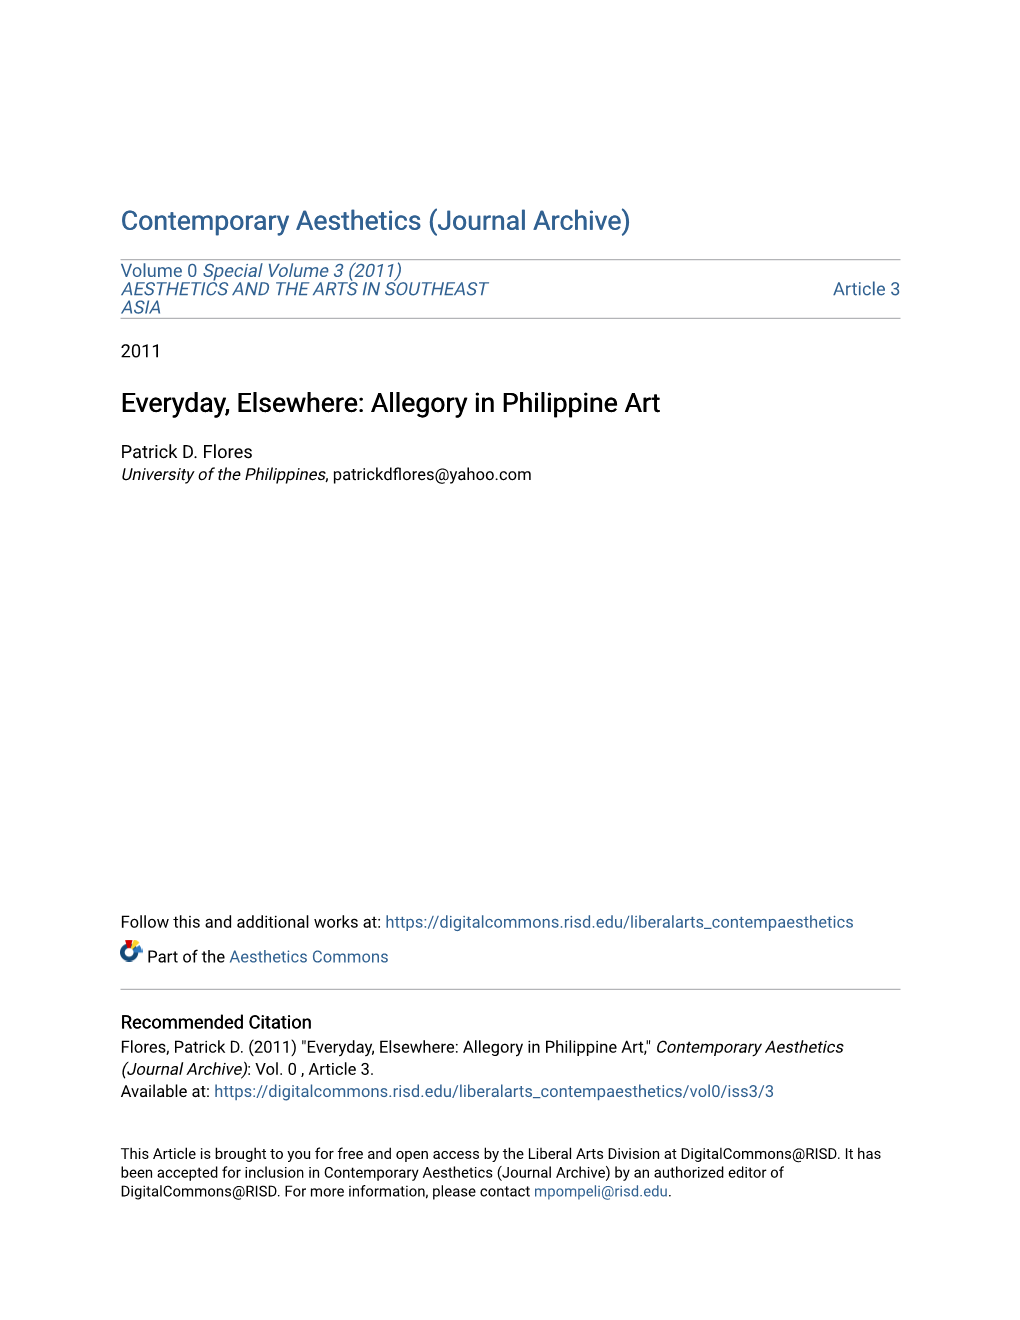 Everyday, Elsewhere: Allegory in Philippine Art